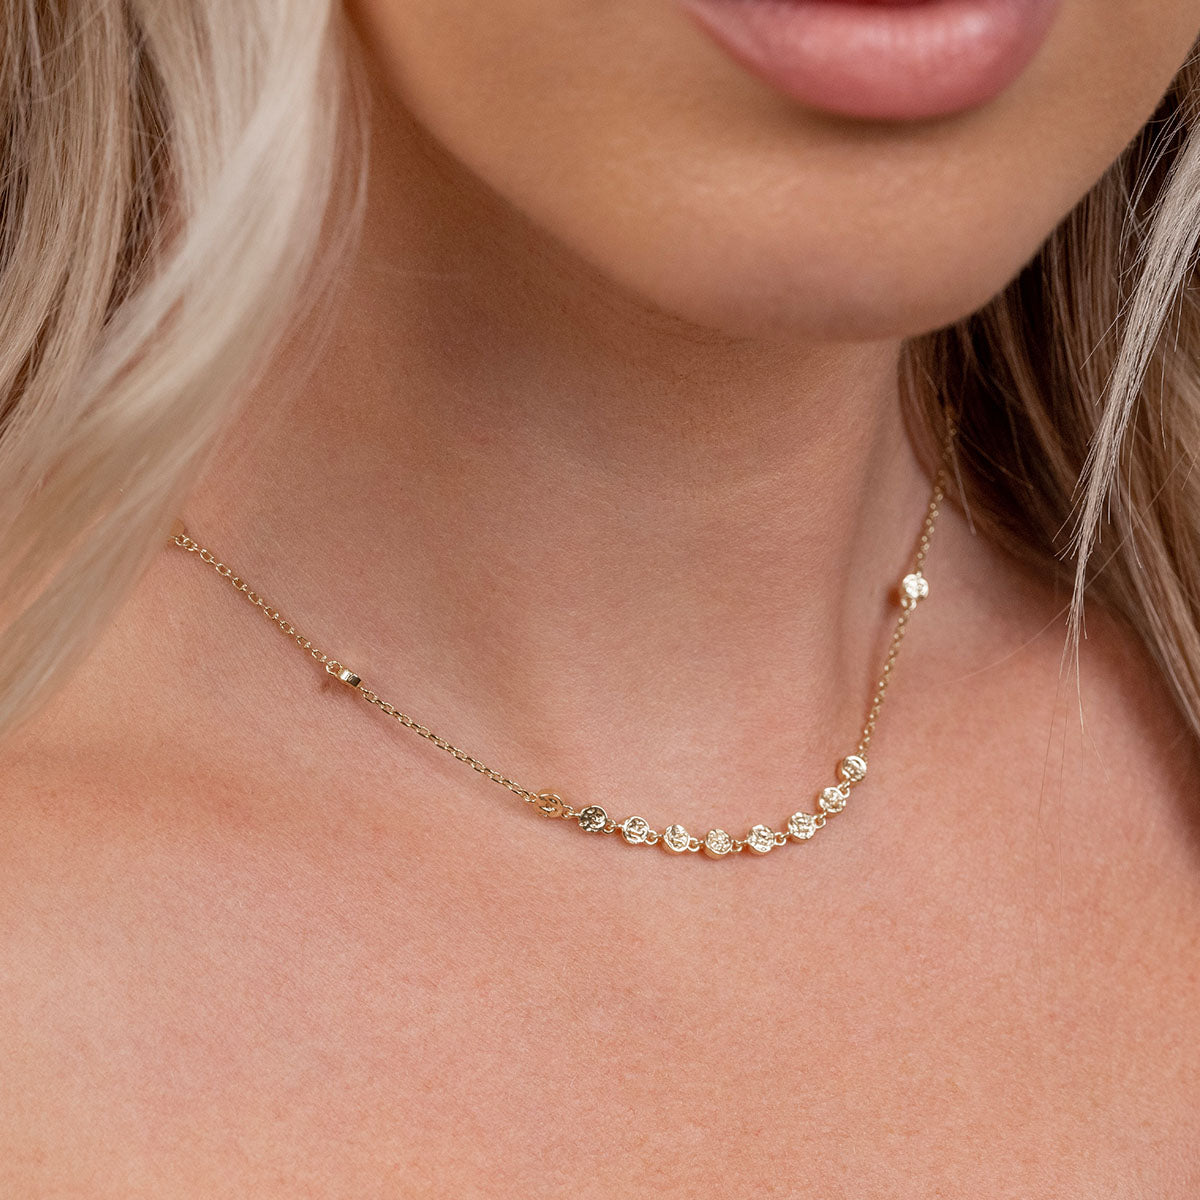 Choker necklace with gold nuggets